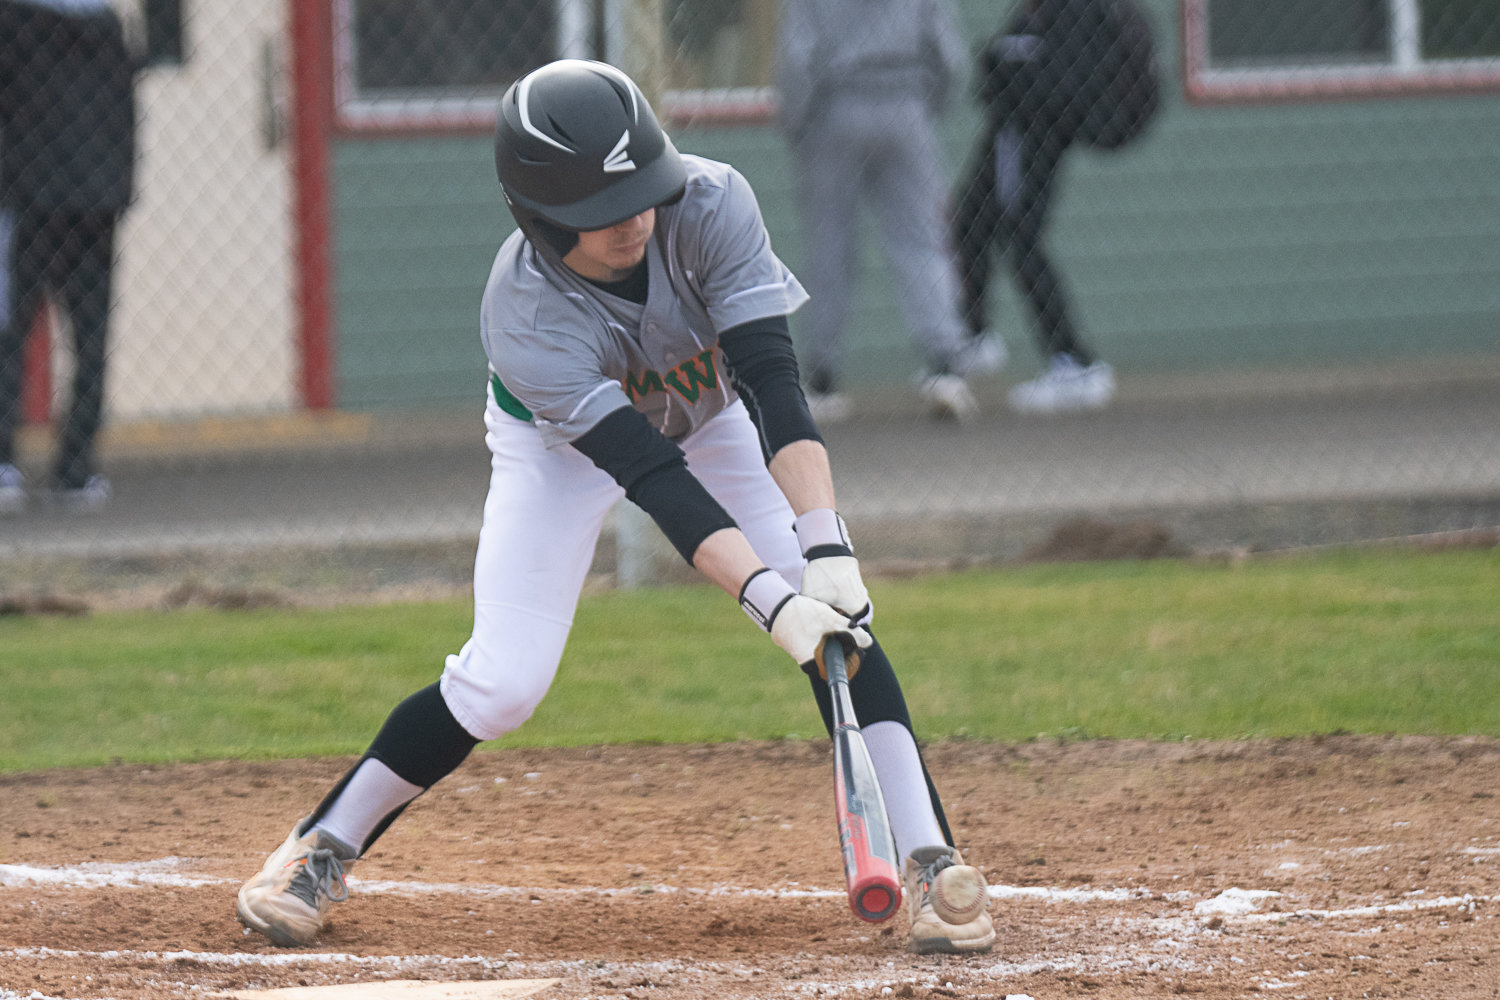 Brecken Pelletier goes down to his shoetops to reach a pitch during MWP's first game at Winlock on March 27.